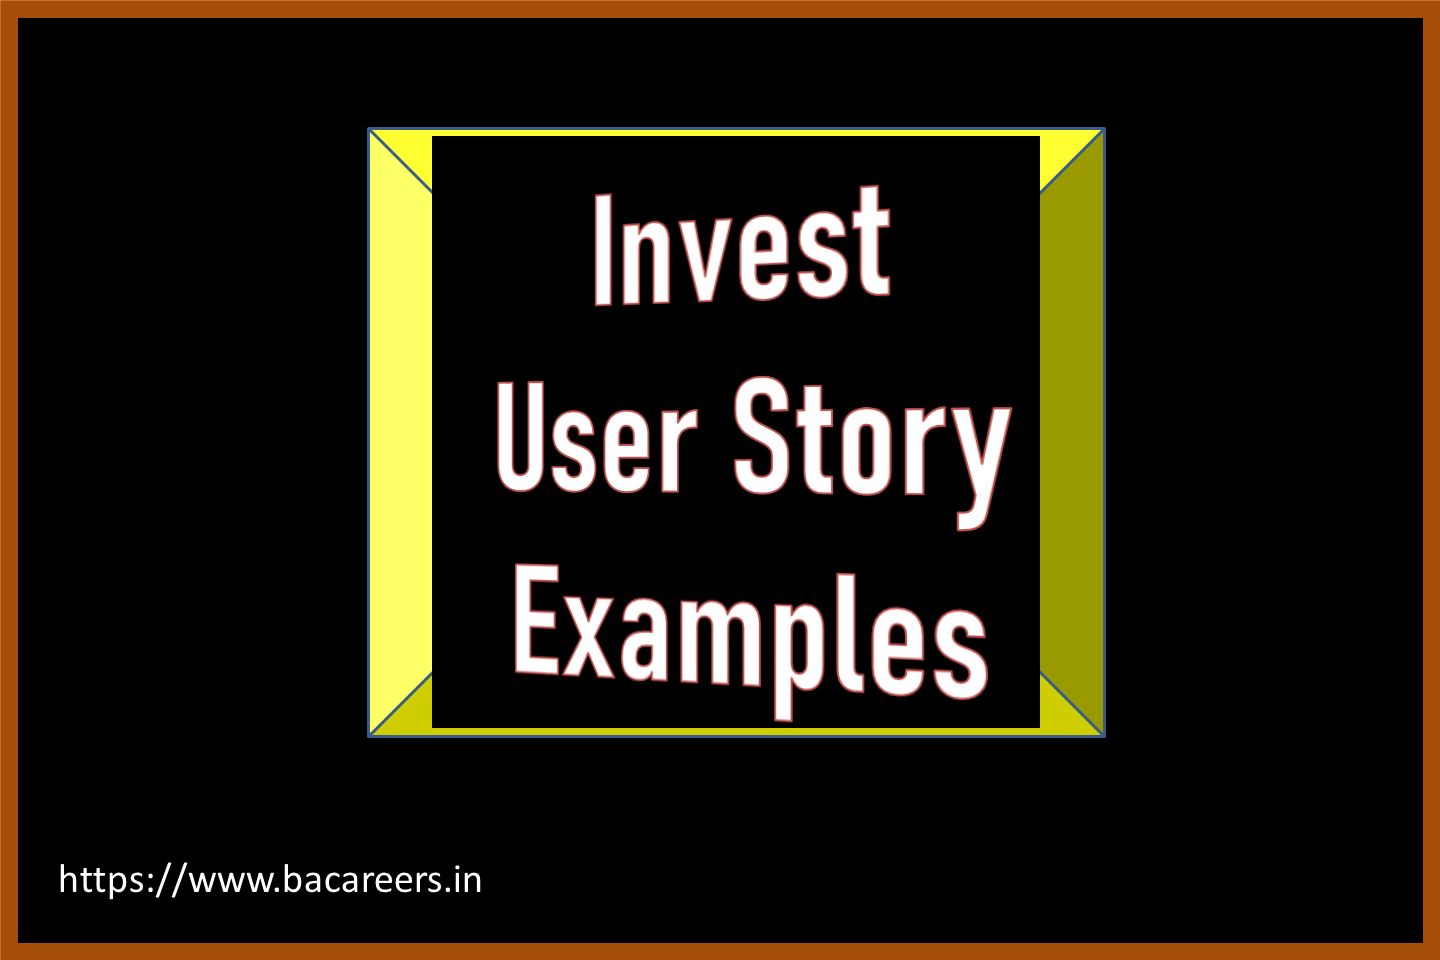 Invest User Story Examples